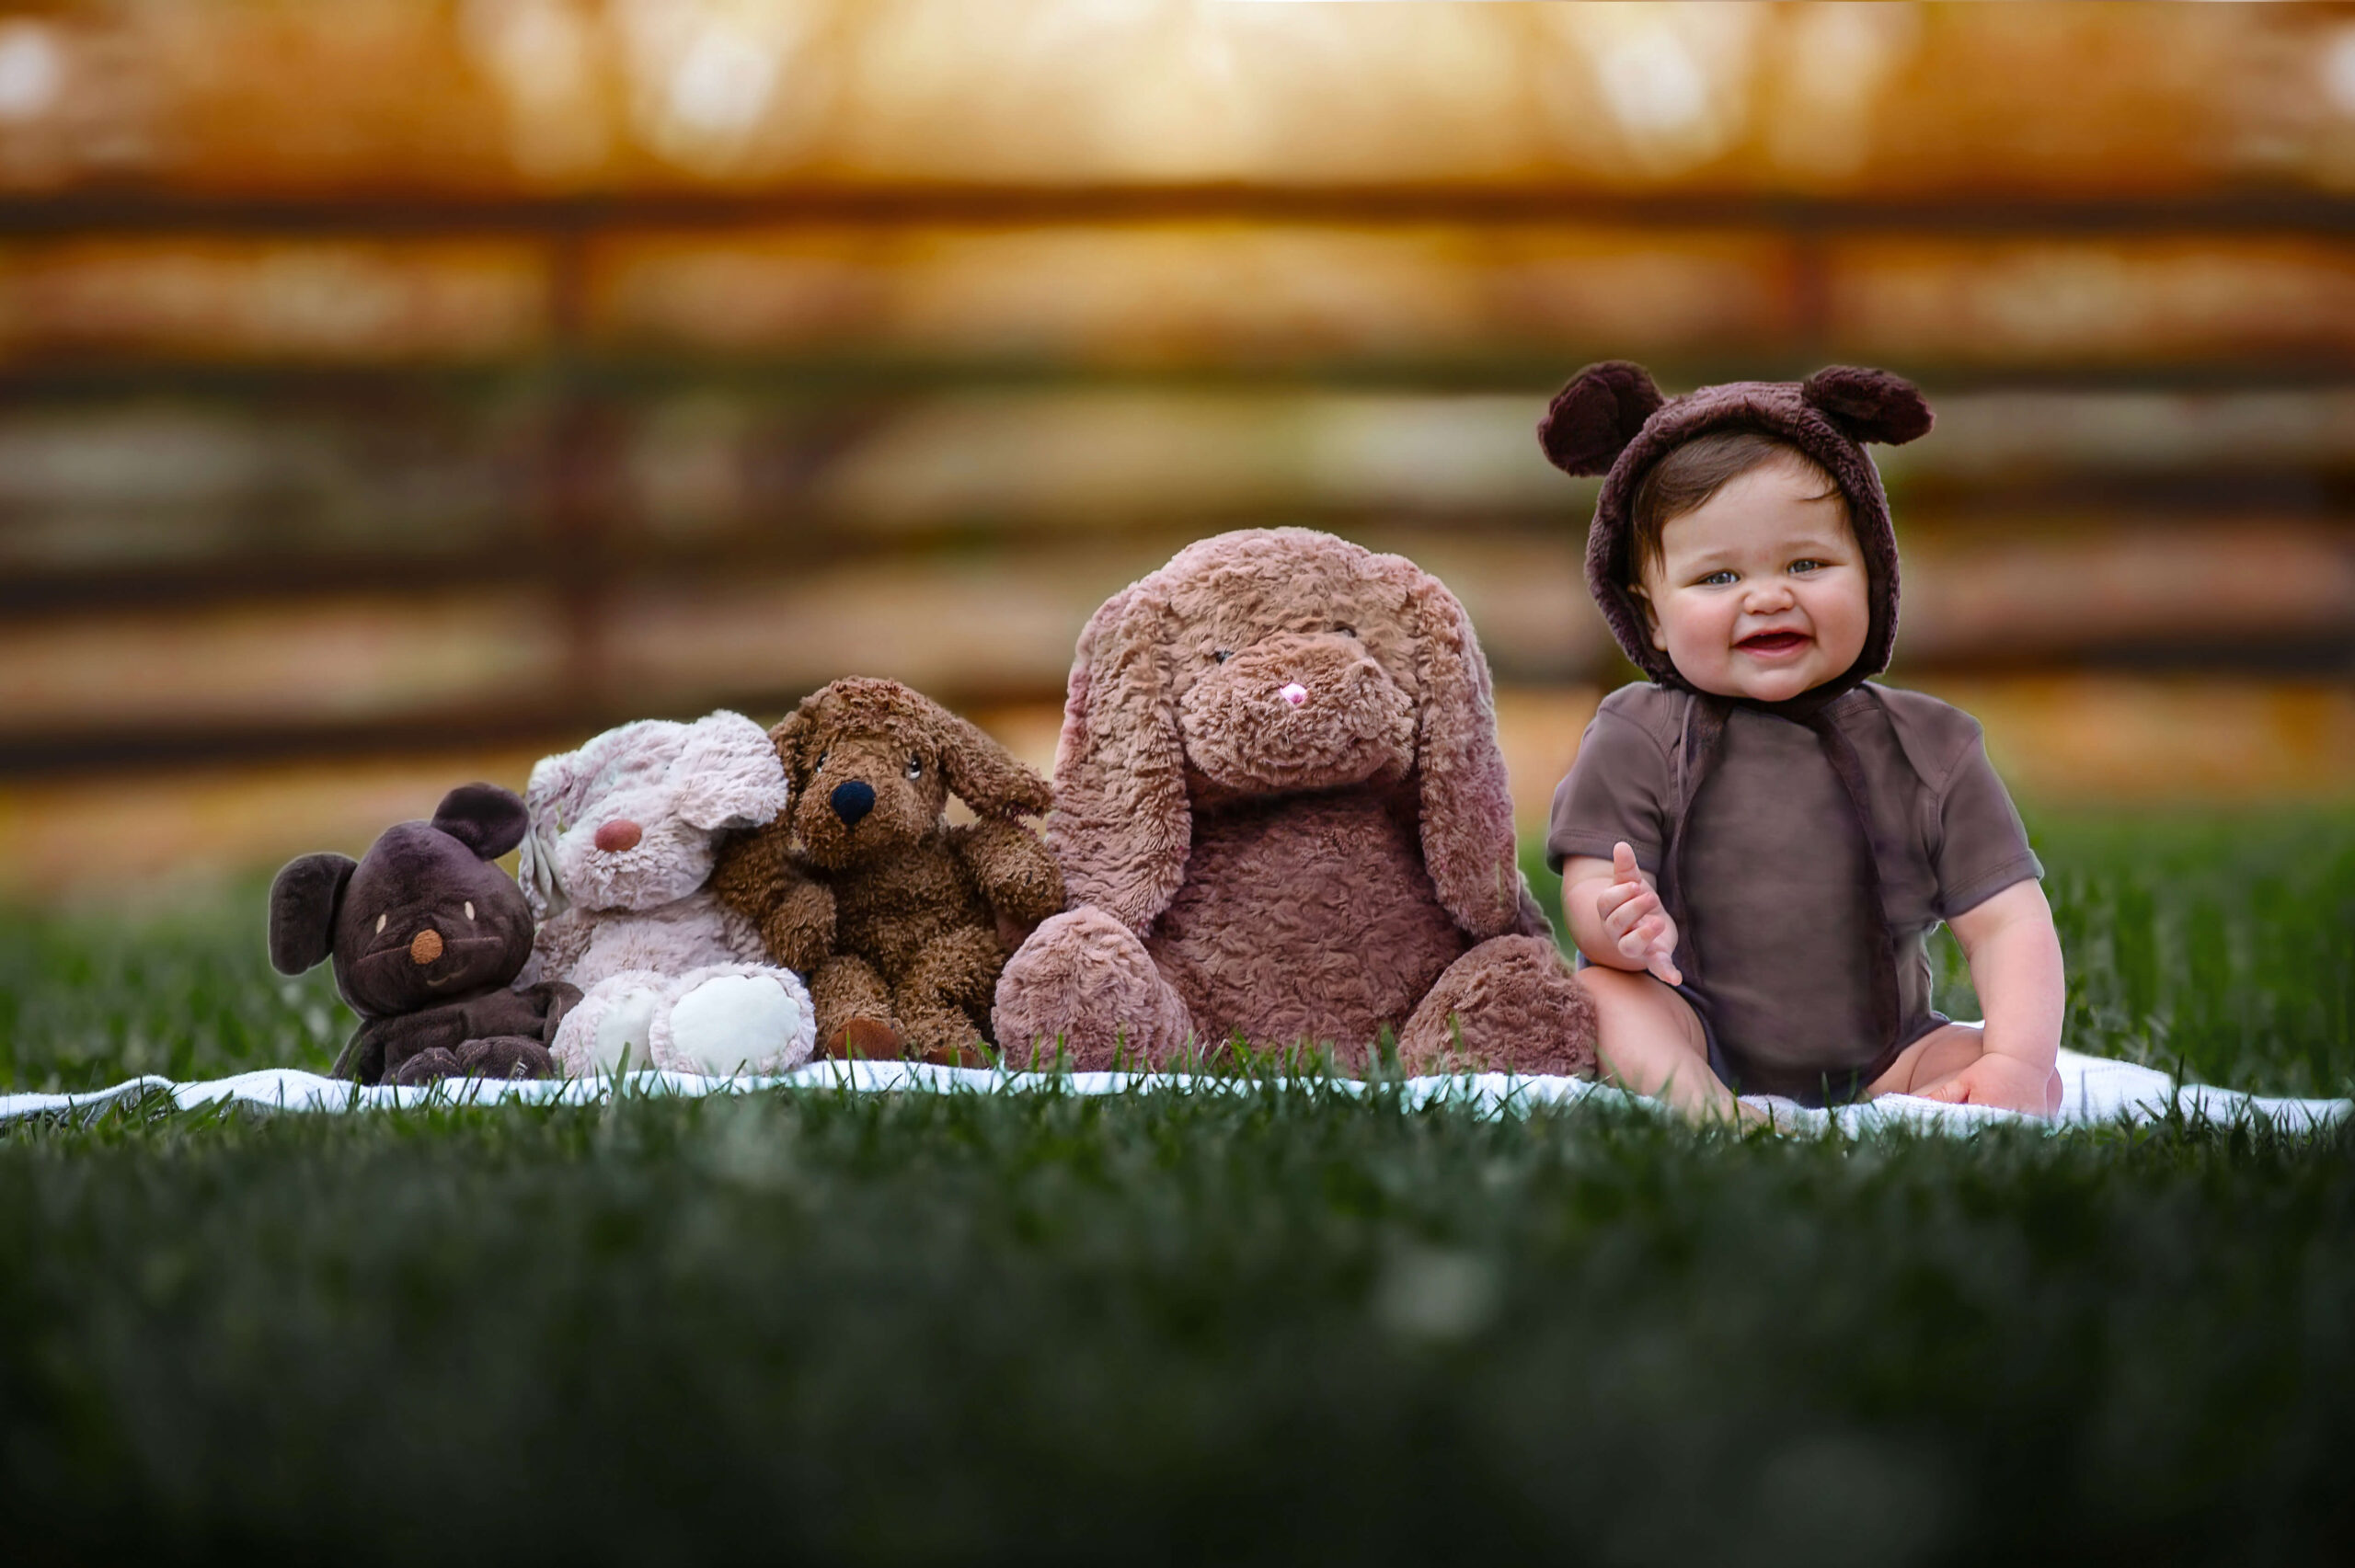 Adorable baby and stuffed animals in Houston Daycare